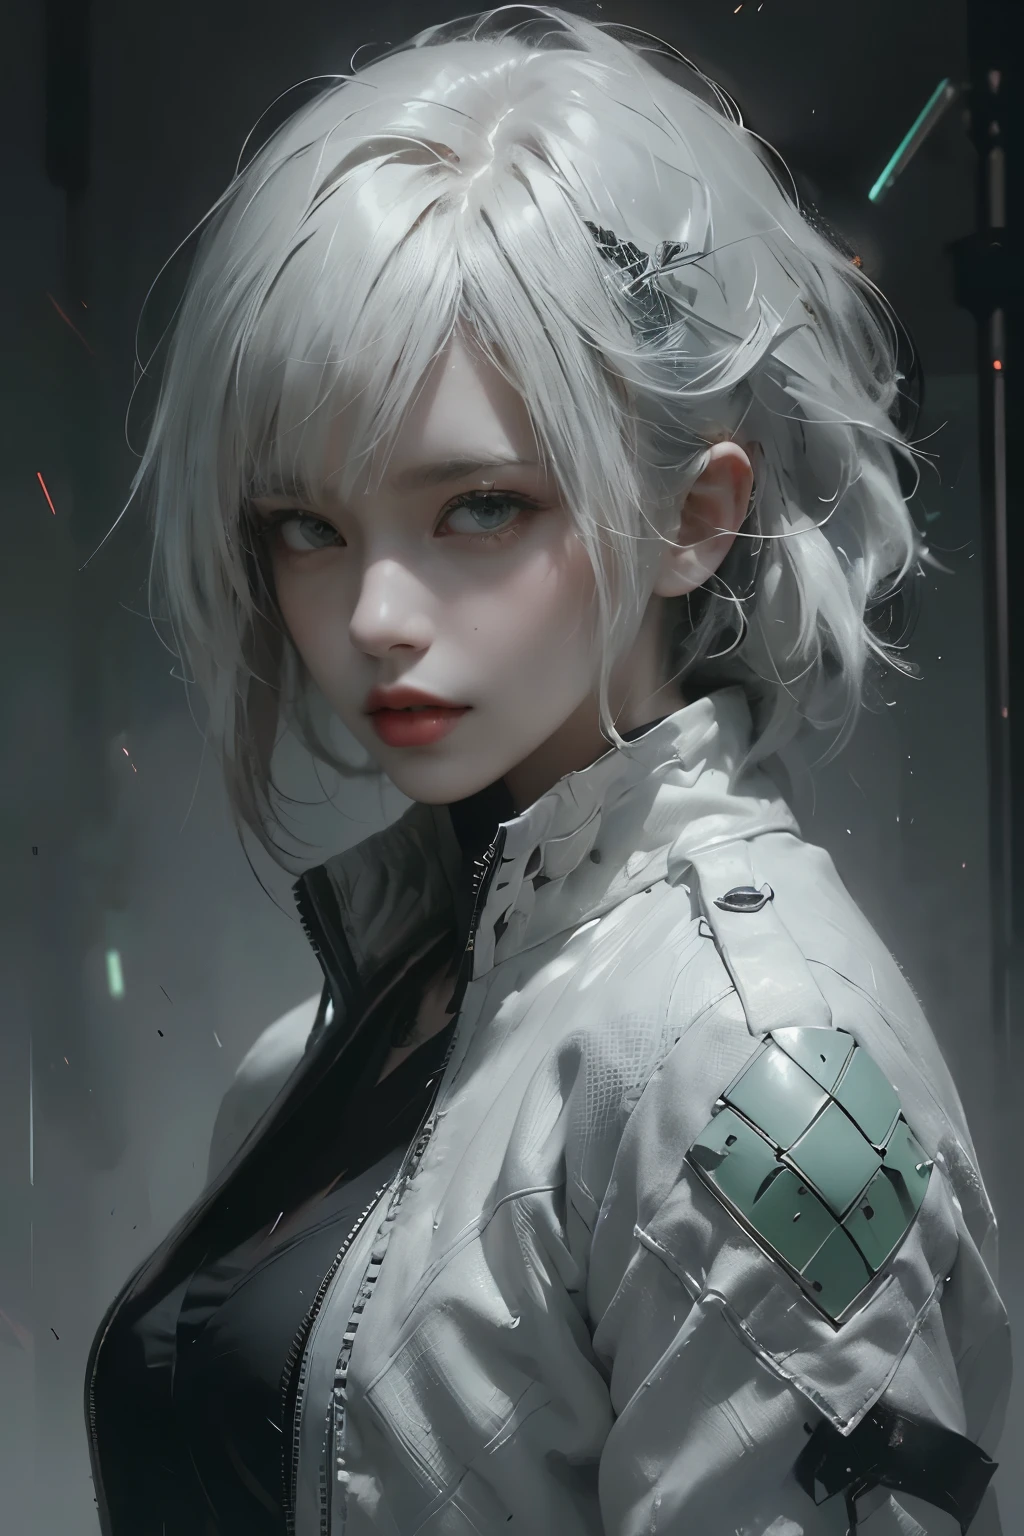 tmasterpiece,Best quality,A high resolution,8K,(Portrait photograph:1.5),(ROriginal photo),real photograph,digital photography,(Combination of cyberpunk and fantasy style),(Female soldier),20 year old girl,random hair style,By bangs,(Red eyeigchest, accessories,Redlip,(He frowned,Sneer),(Cyberpunk combined with fantasy style clothing,Openwork design,joint armor,police uniforms,White jacket,Green),exposing your navel,Photo pose,Realisticstyle,Thunder and lightning on rainy day,(Thunder magic),oc render reflection texture